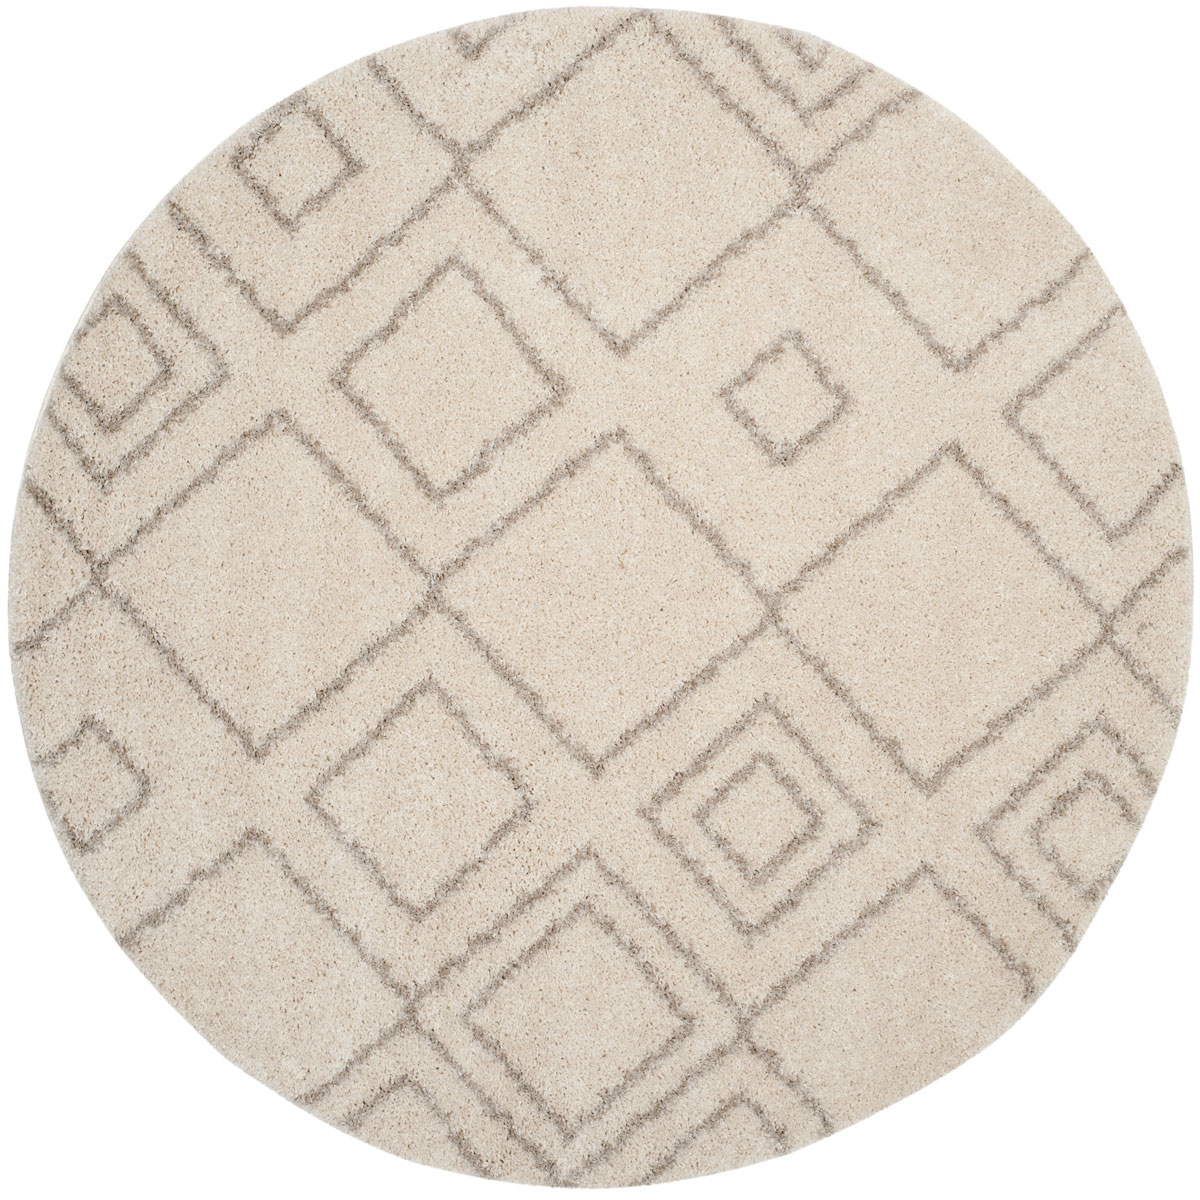 Asg744a-7r Arizona Shag Power Loomed Round Area Rug, Ivory & Beige - 6 Ft.-7 In. X 6 Ft.-7 In.